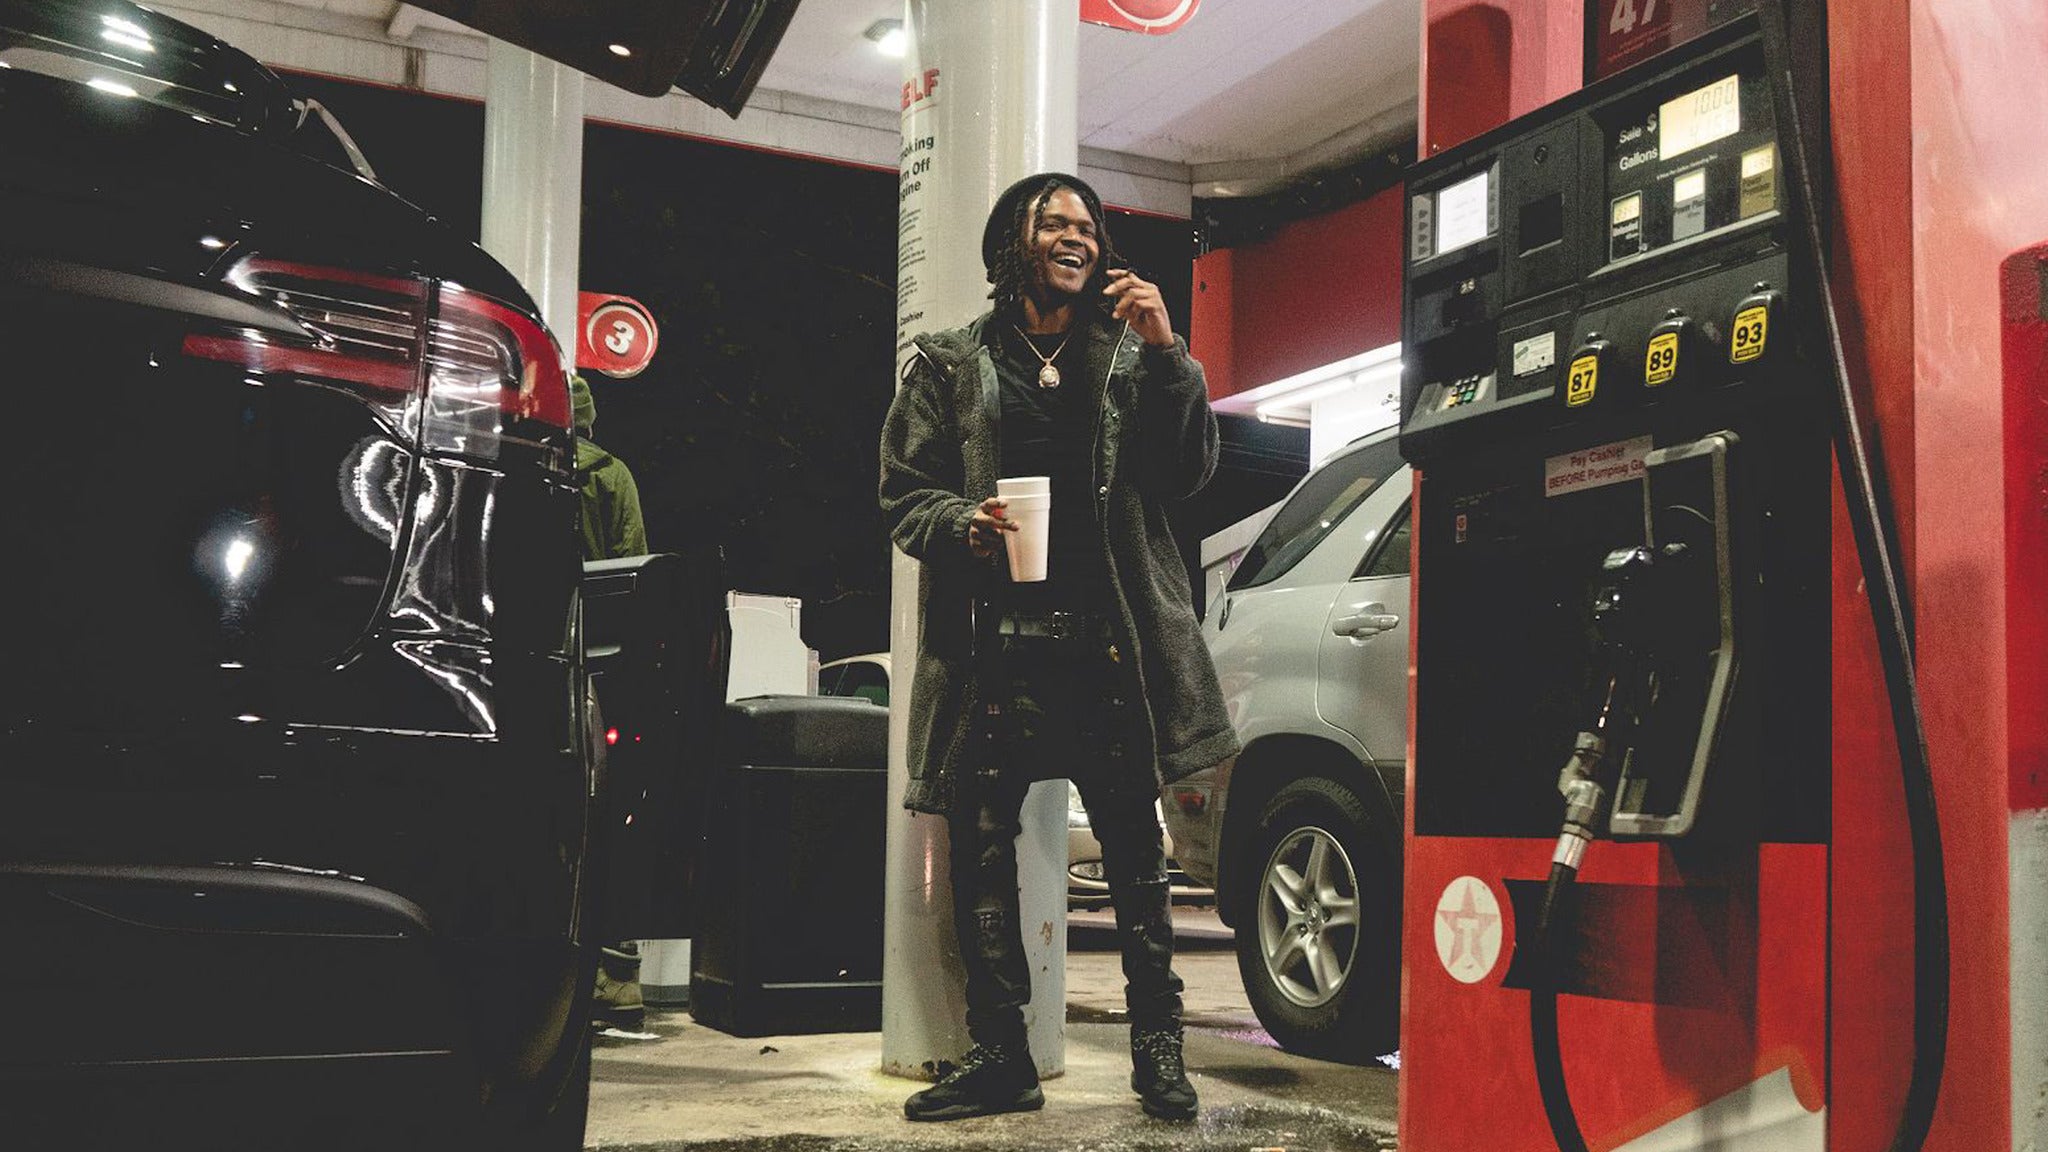 Young Nudy - DR. EV4L VS. RICH SHOOTER TOUR presale password for early tickets in Charlotte